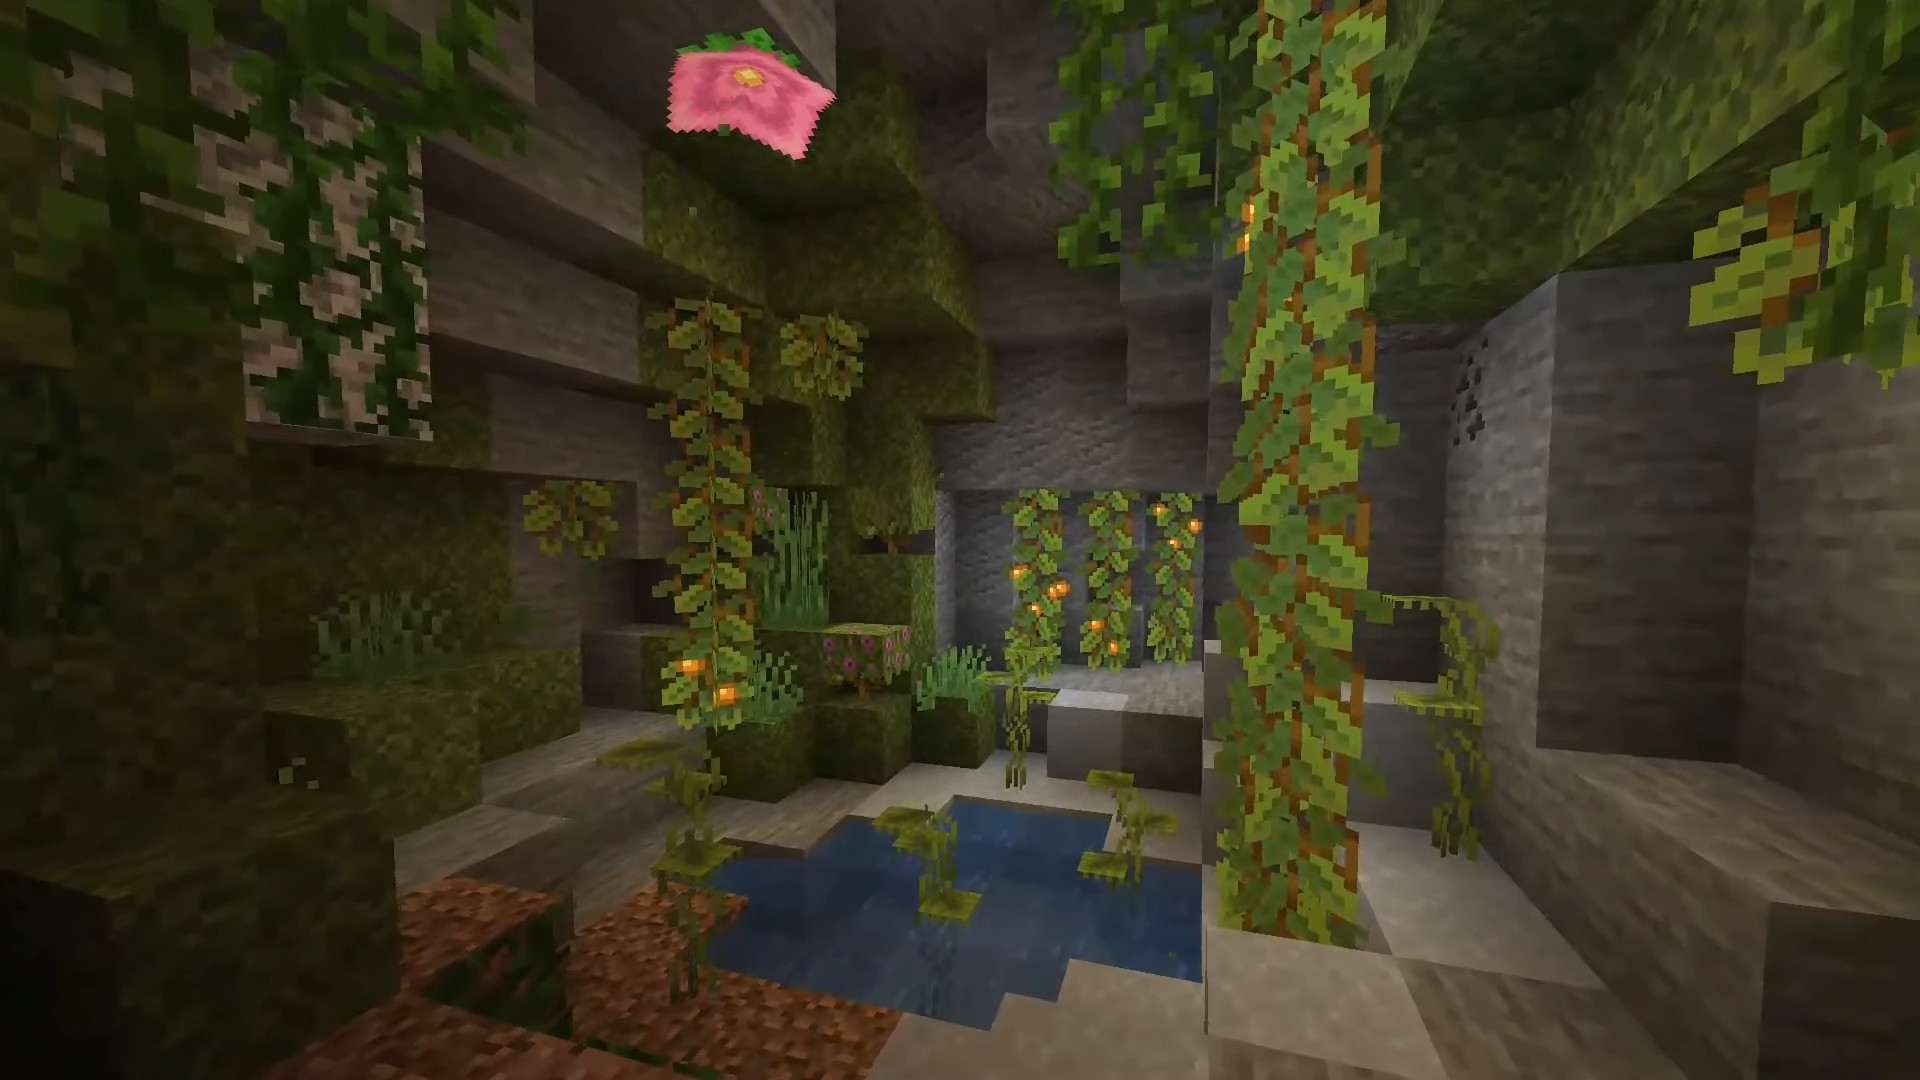 Latest Minecraft Caves & Cliffs Snapshot Shows Off Glowing Berries (1)